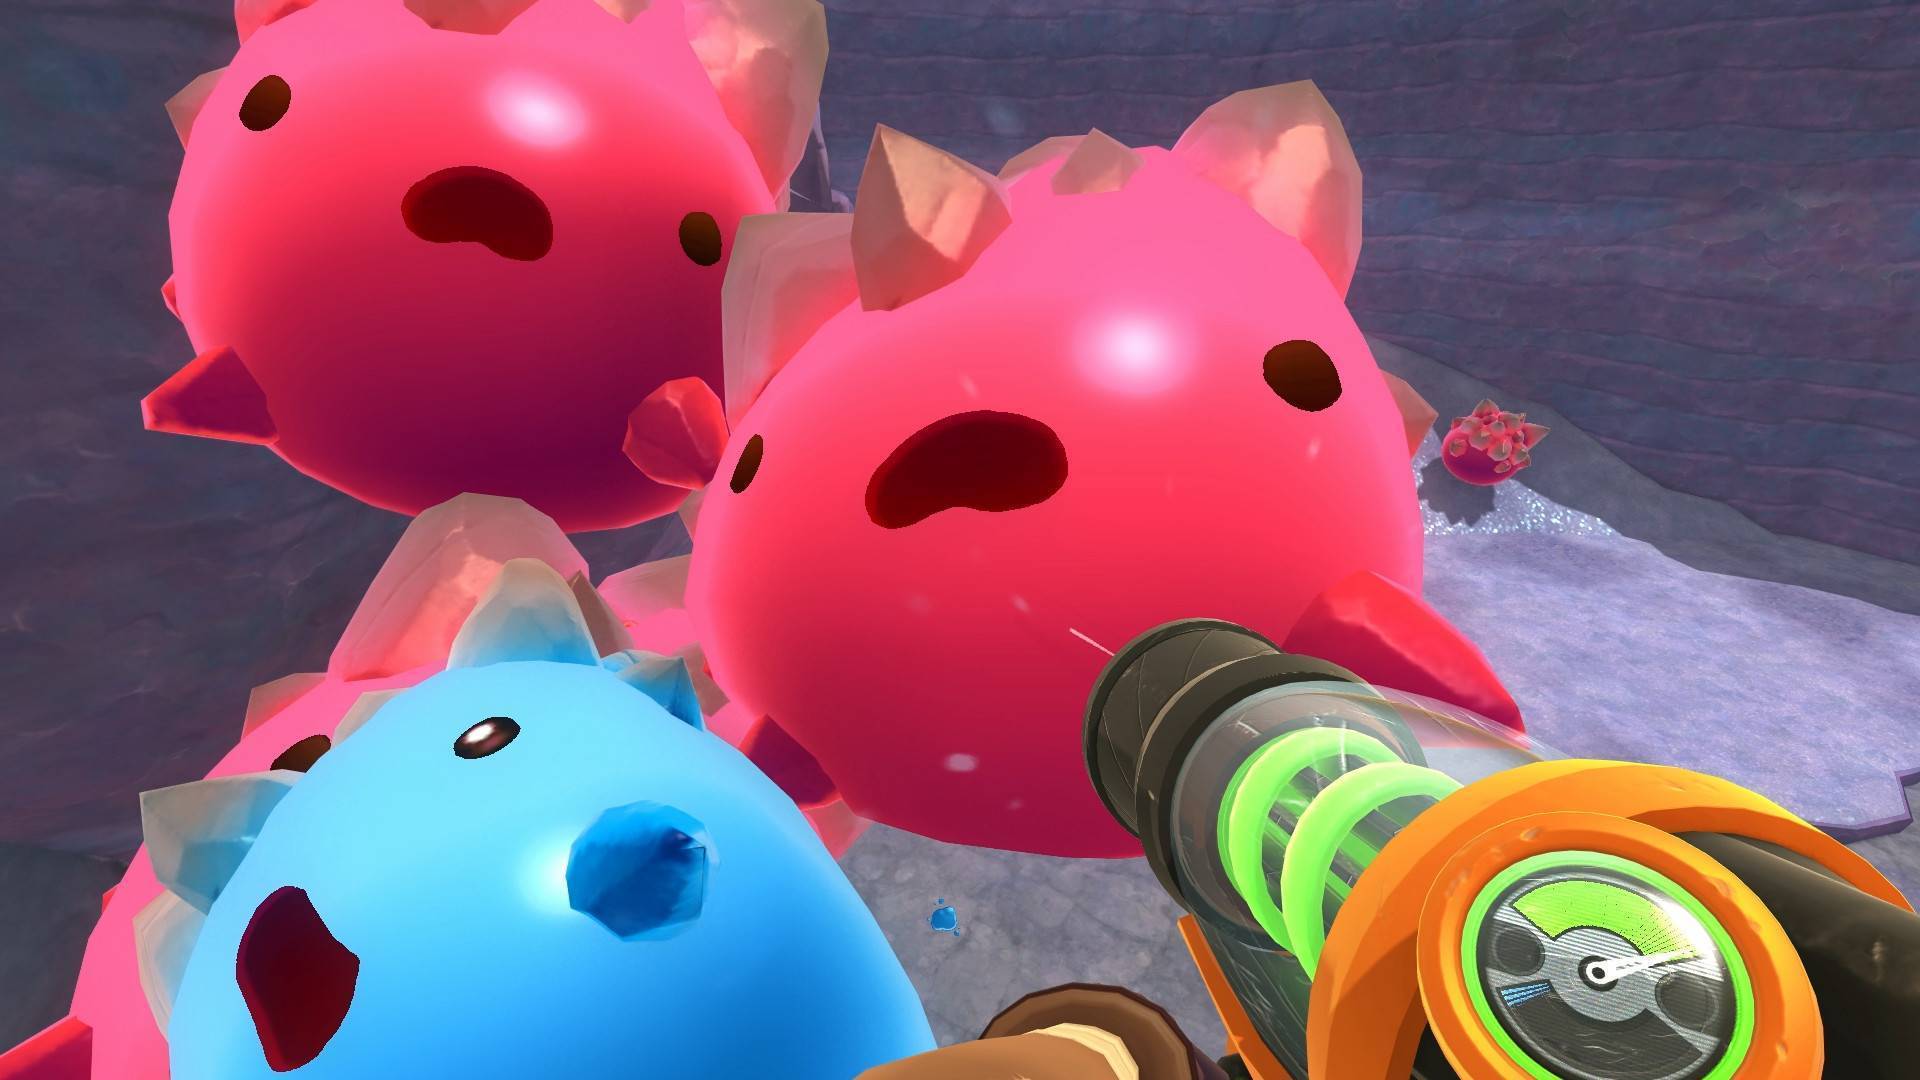 Slime Rancher (PS4) cheap - Price of $8.33